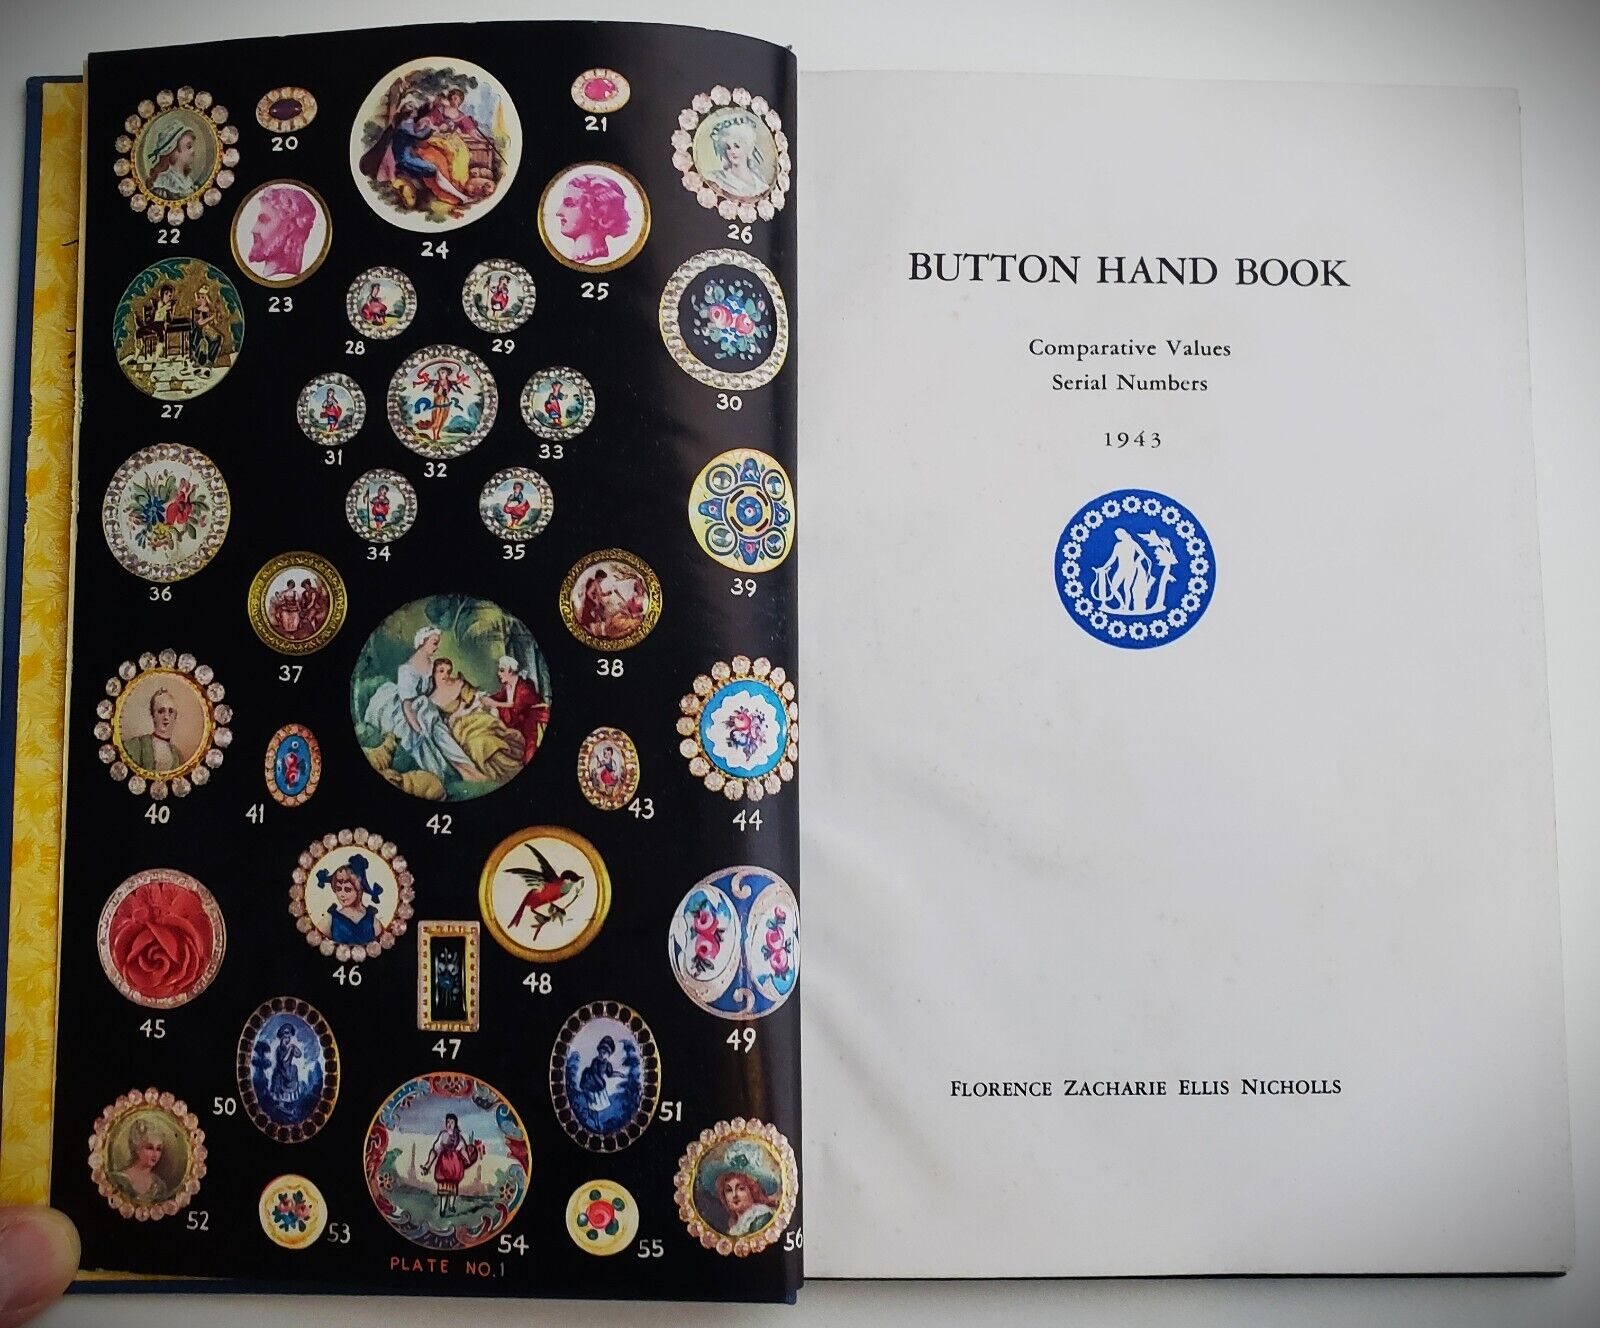 Vintage 1943 Original BUTTON HAND BOOK Comparative Values Serial Numbers 1943